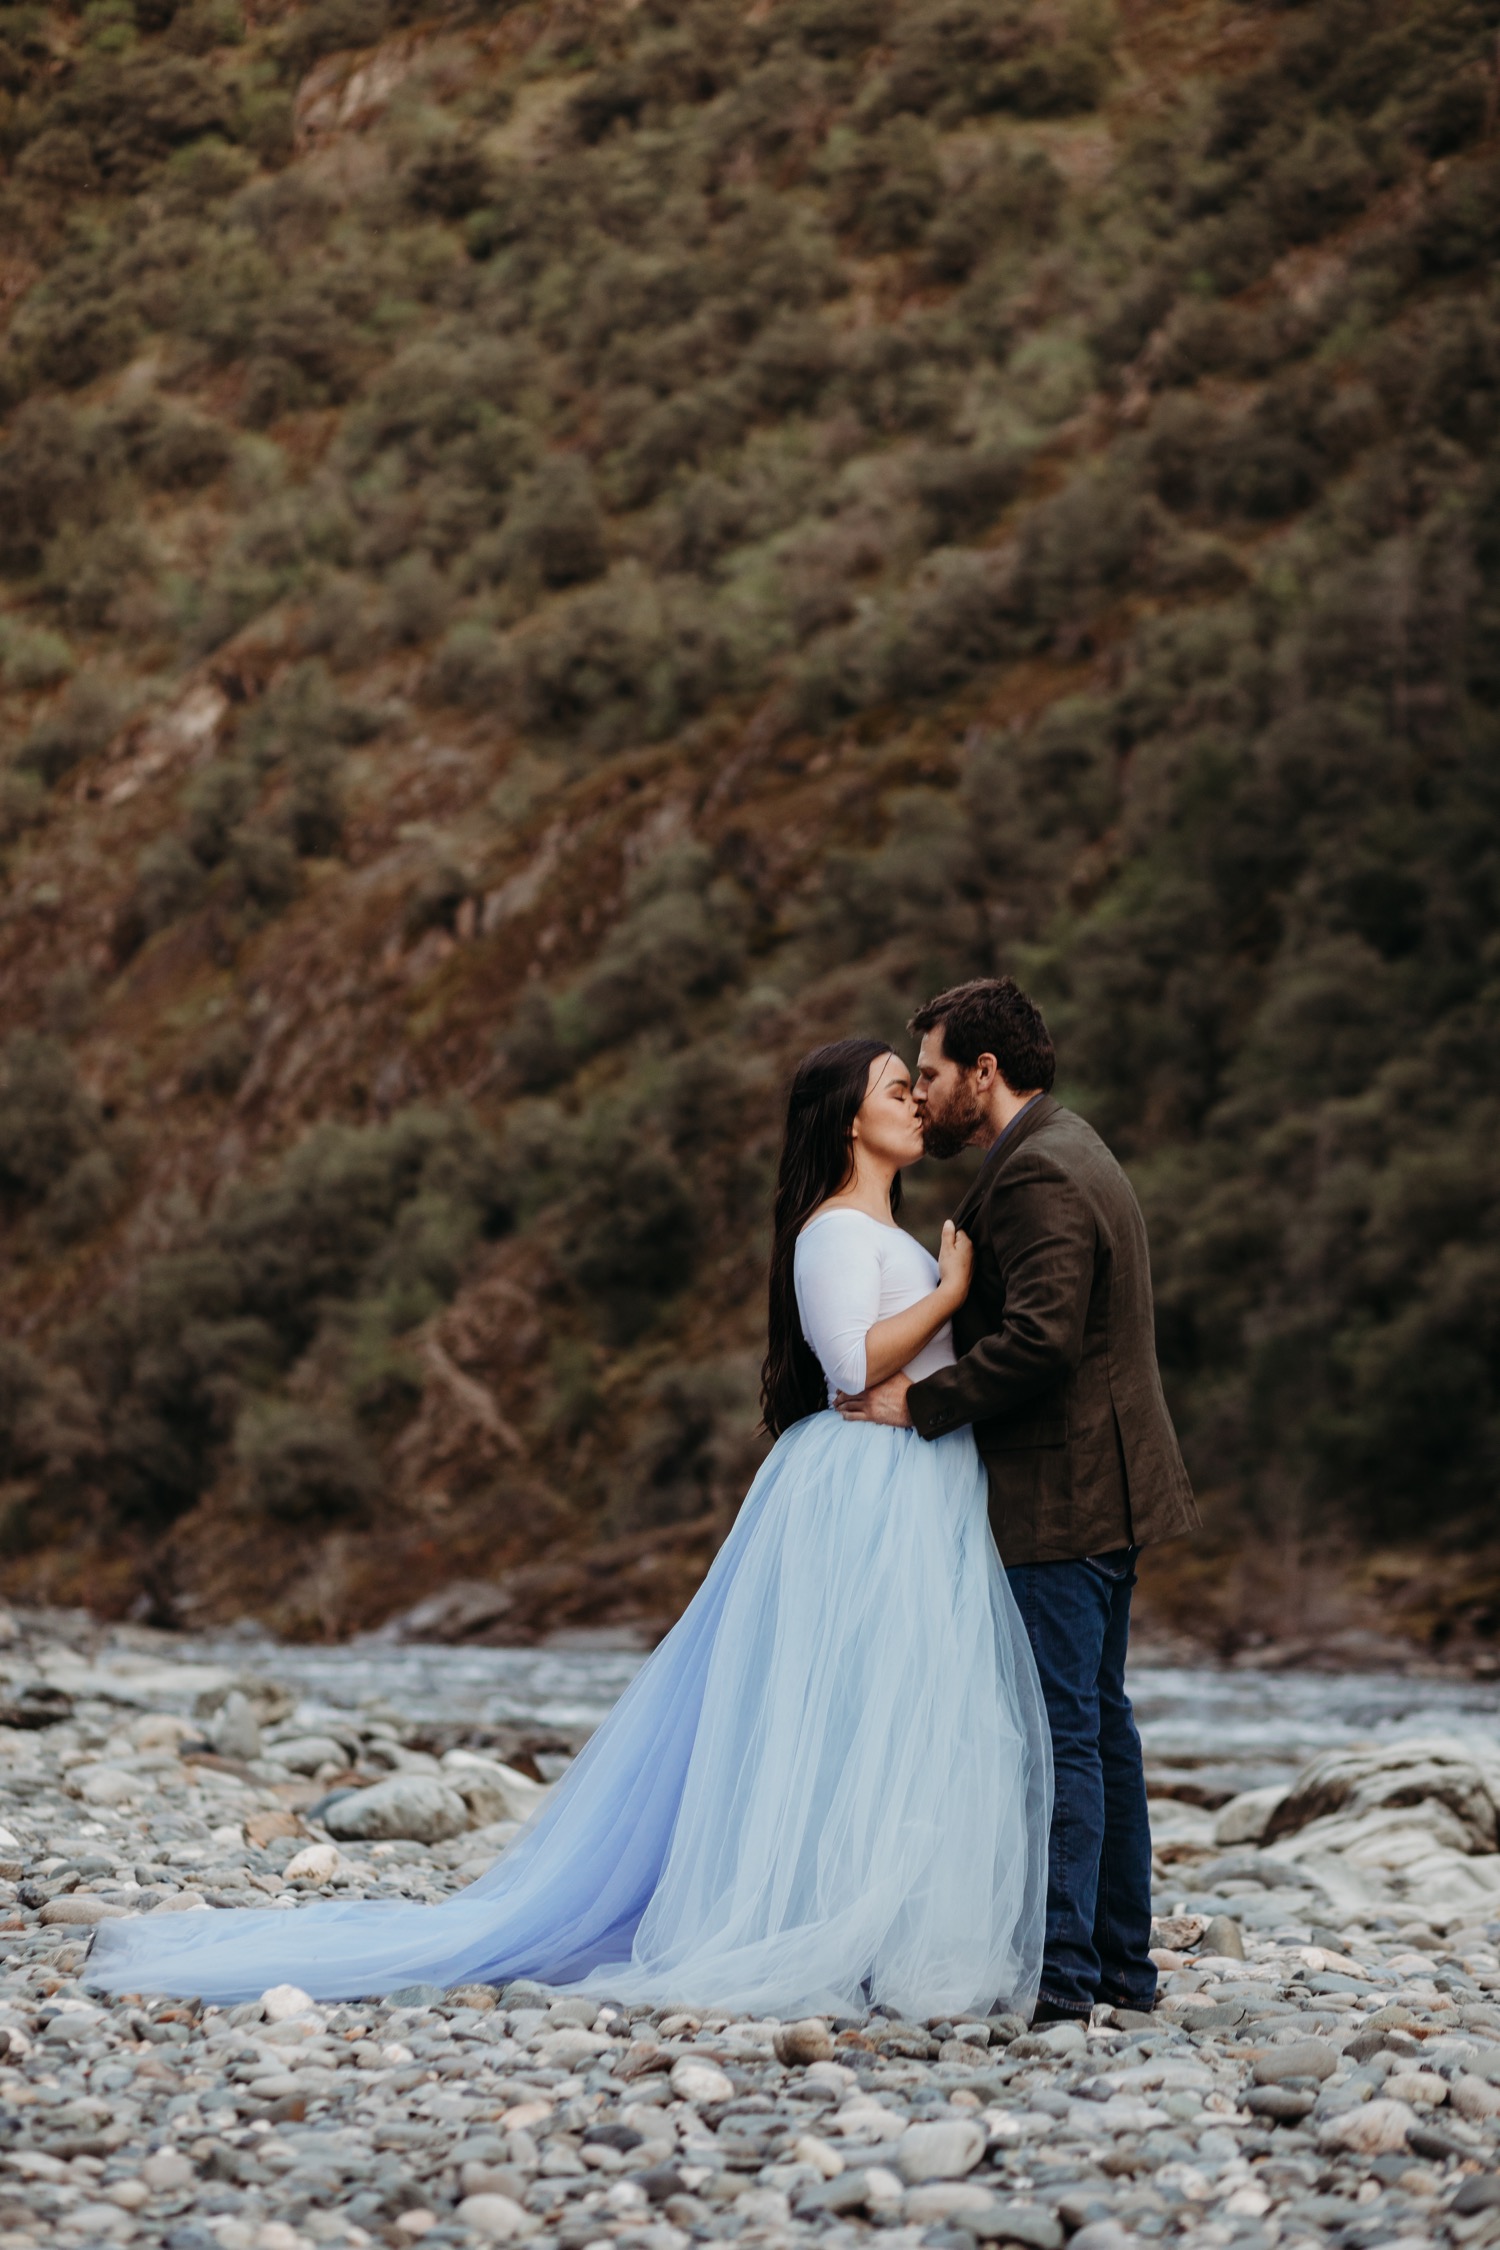 Couple kisses on the rocky short of the American River during their engagement photoshoot.